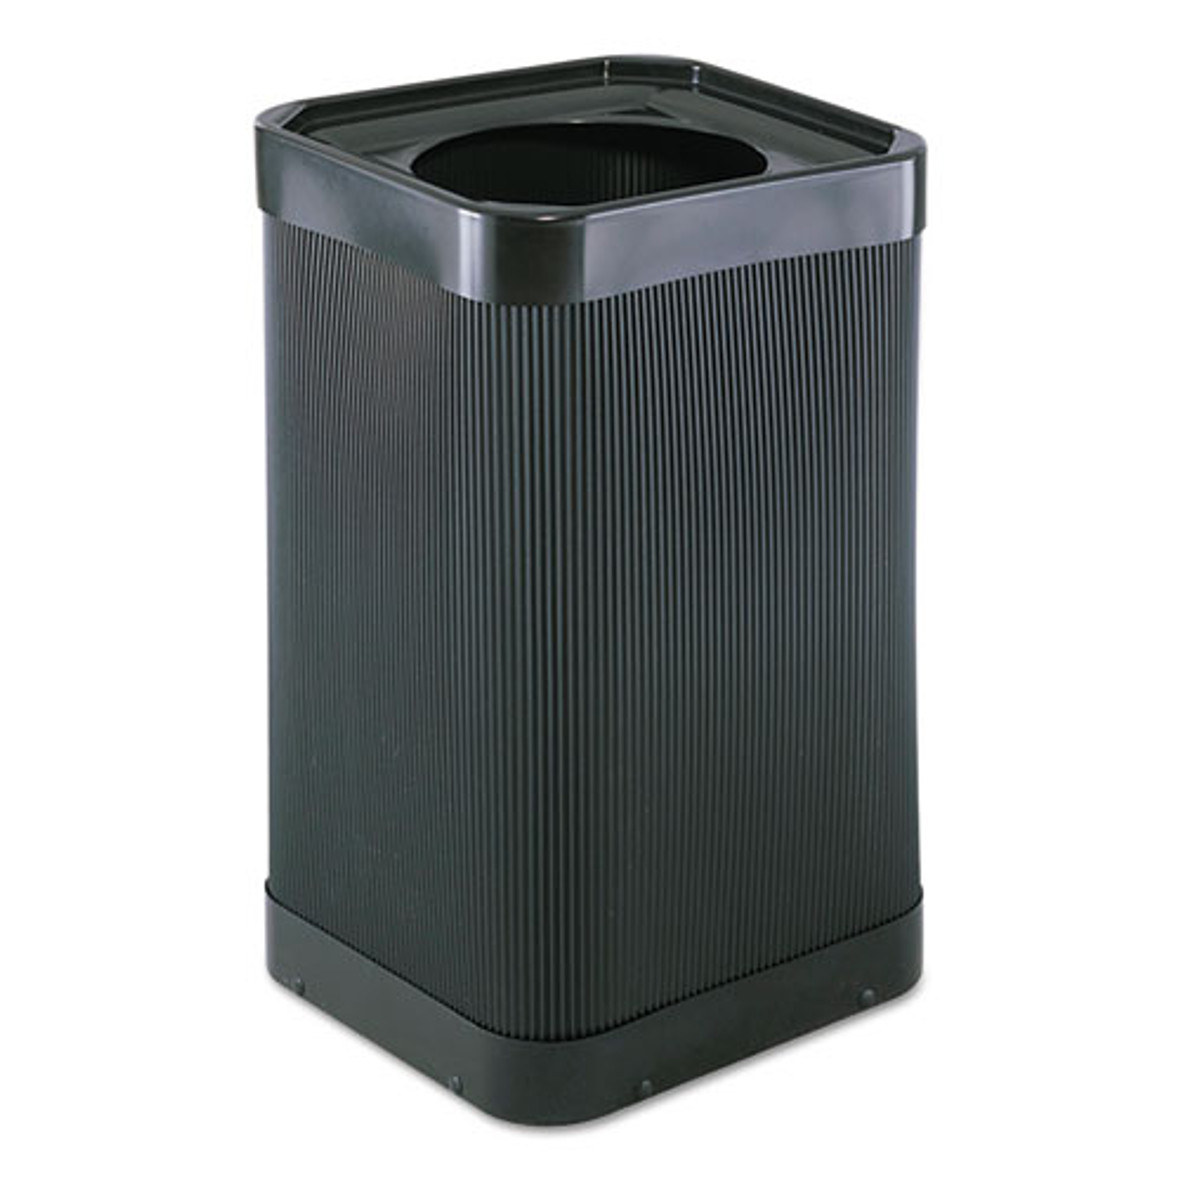 Safco® At-Your-Disposal Top-open Waste Receptacle, Square, Polyethylene, 38 gal, Black, Pack of 1